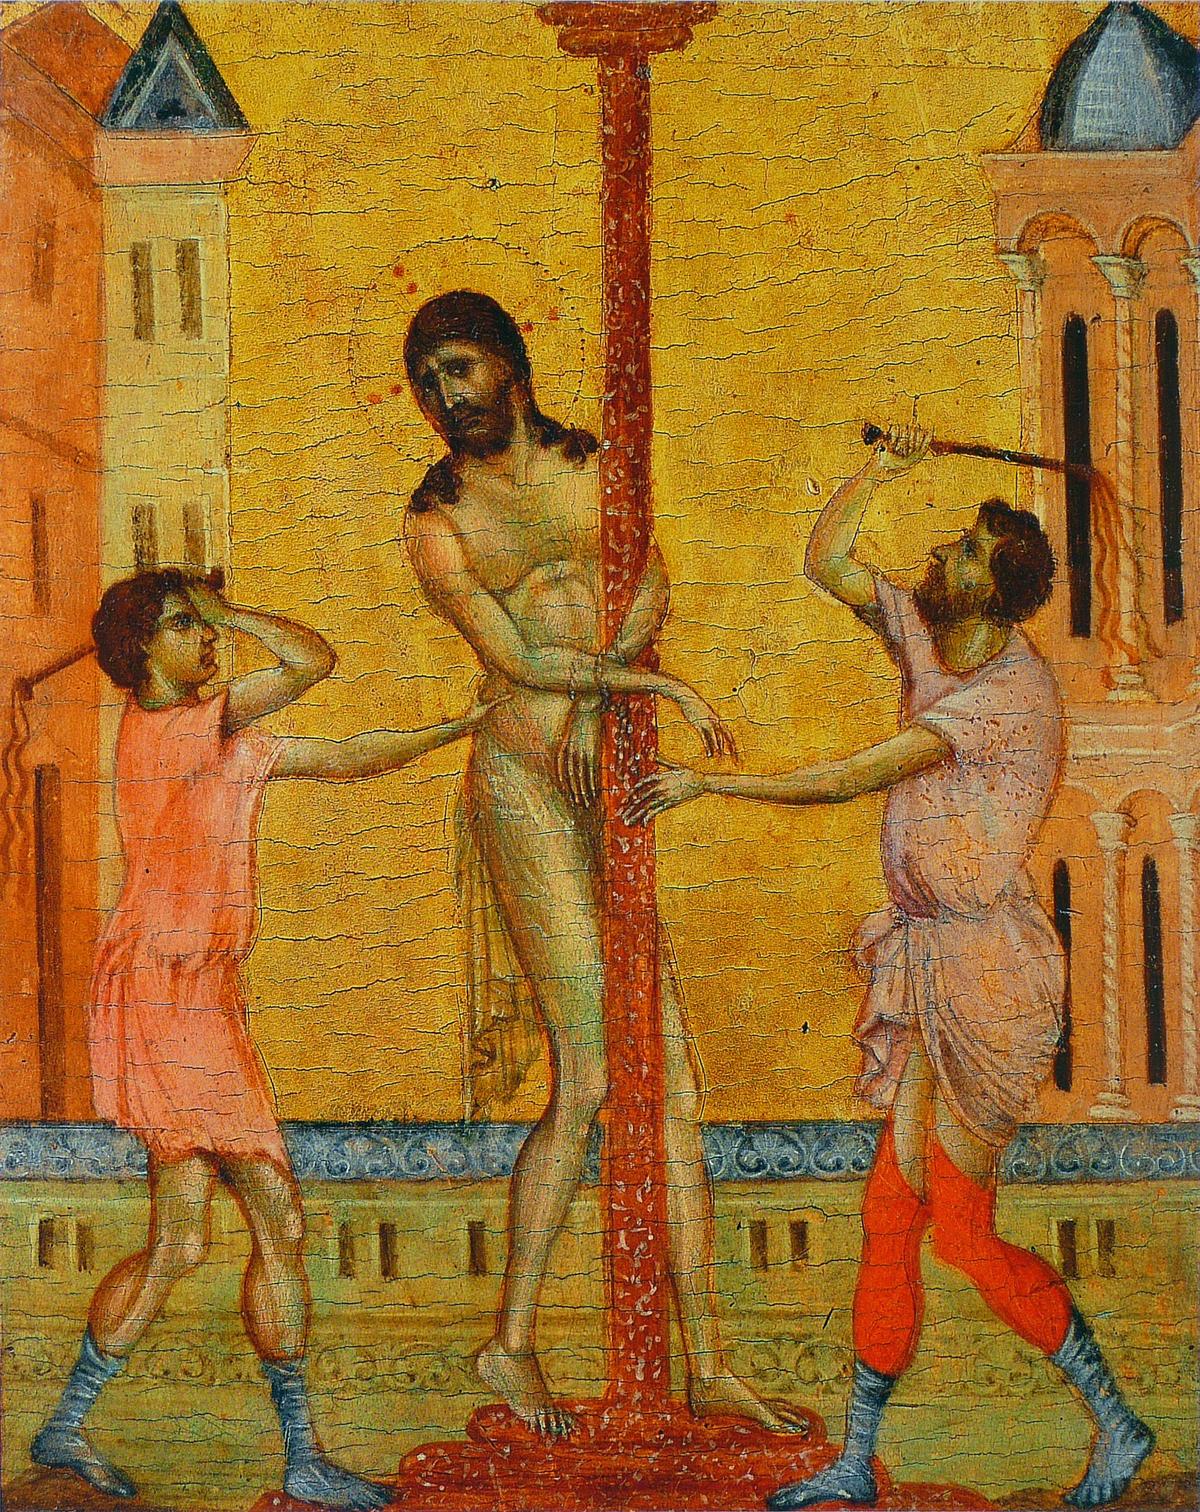 Cimabue's "The Flagellation of Christ," circa 1280 (©<a href="https://commons.wikimedia.org/wiki/File:Cimabue_-_Flagellation.jpg">Wikimedia Commons</a>)